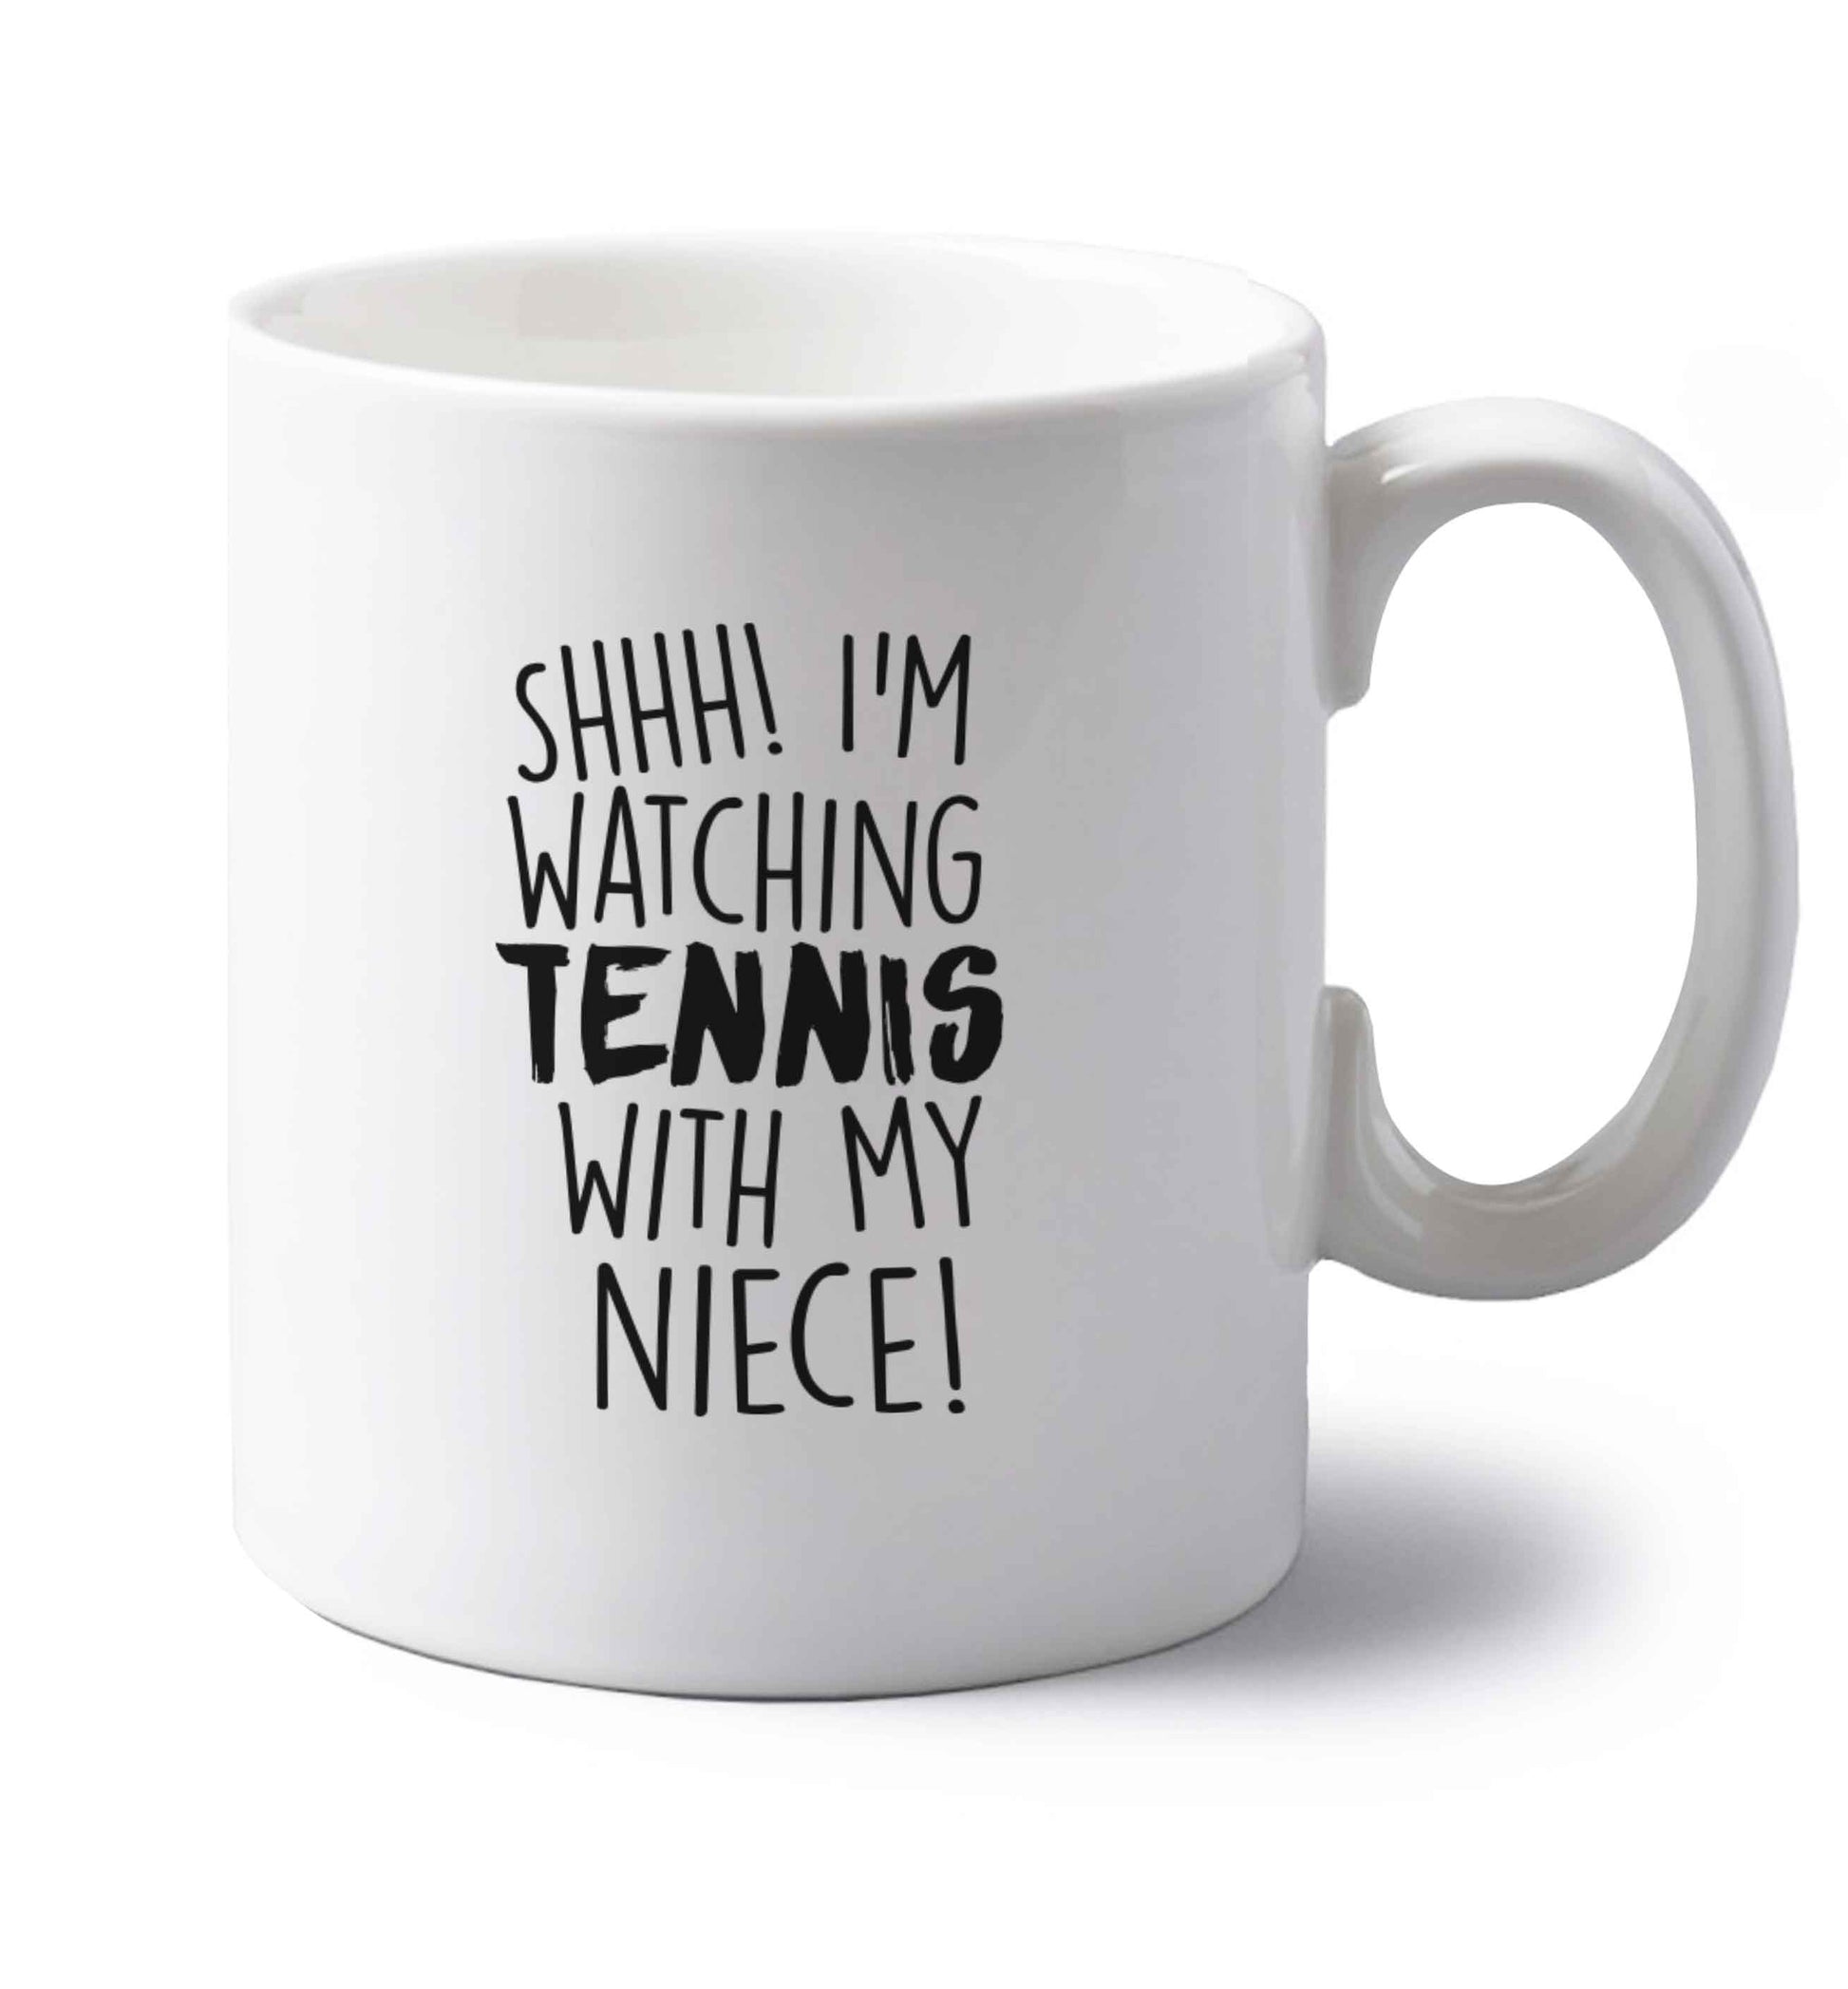 Shh! I'm watching tennis with my niece! left handed white ceramic mug 